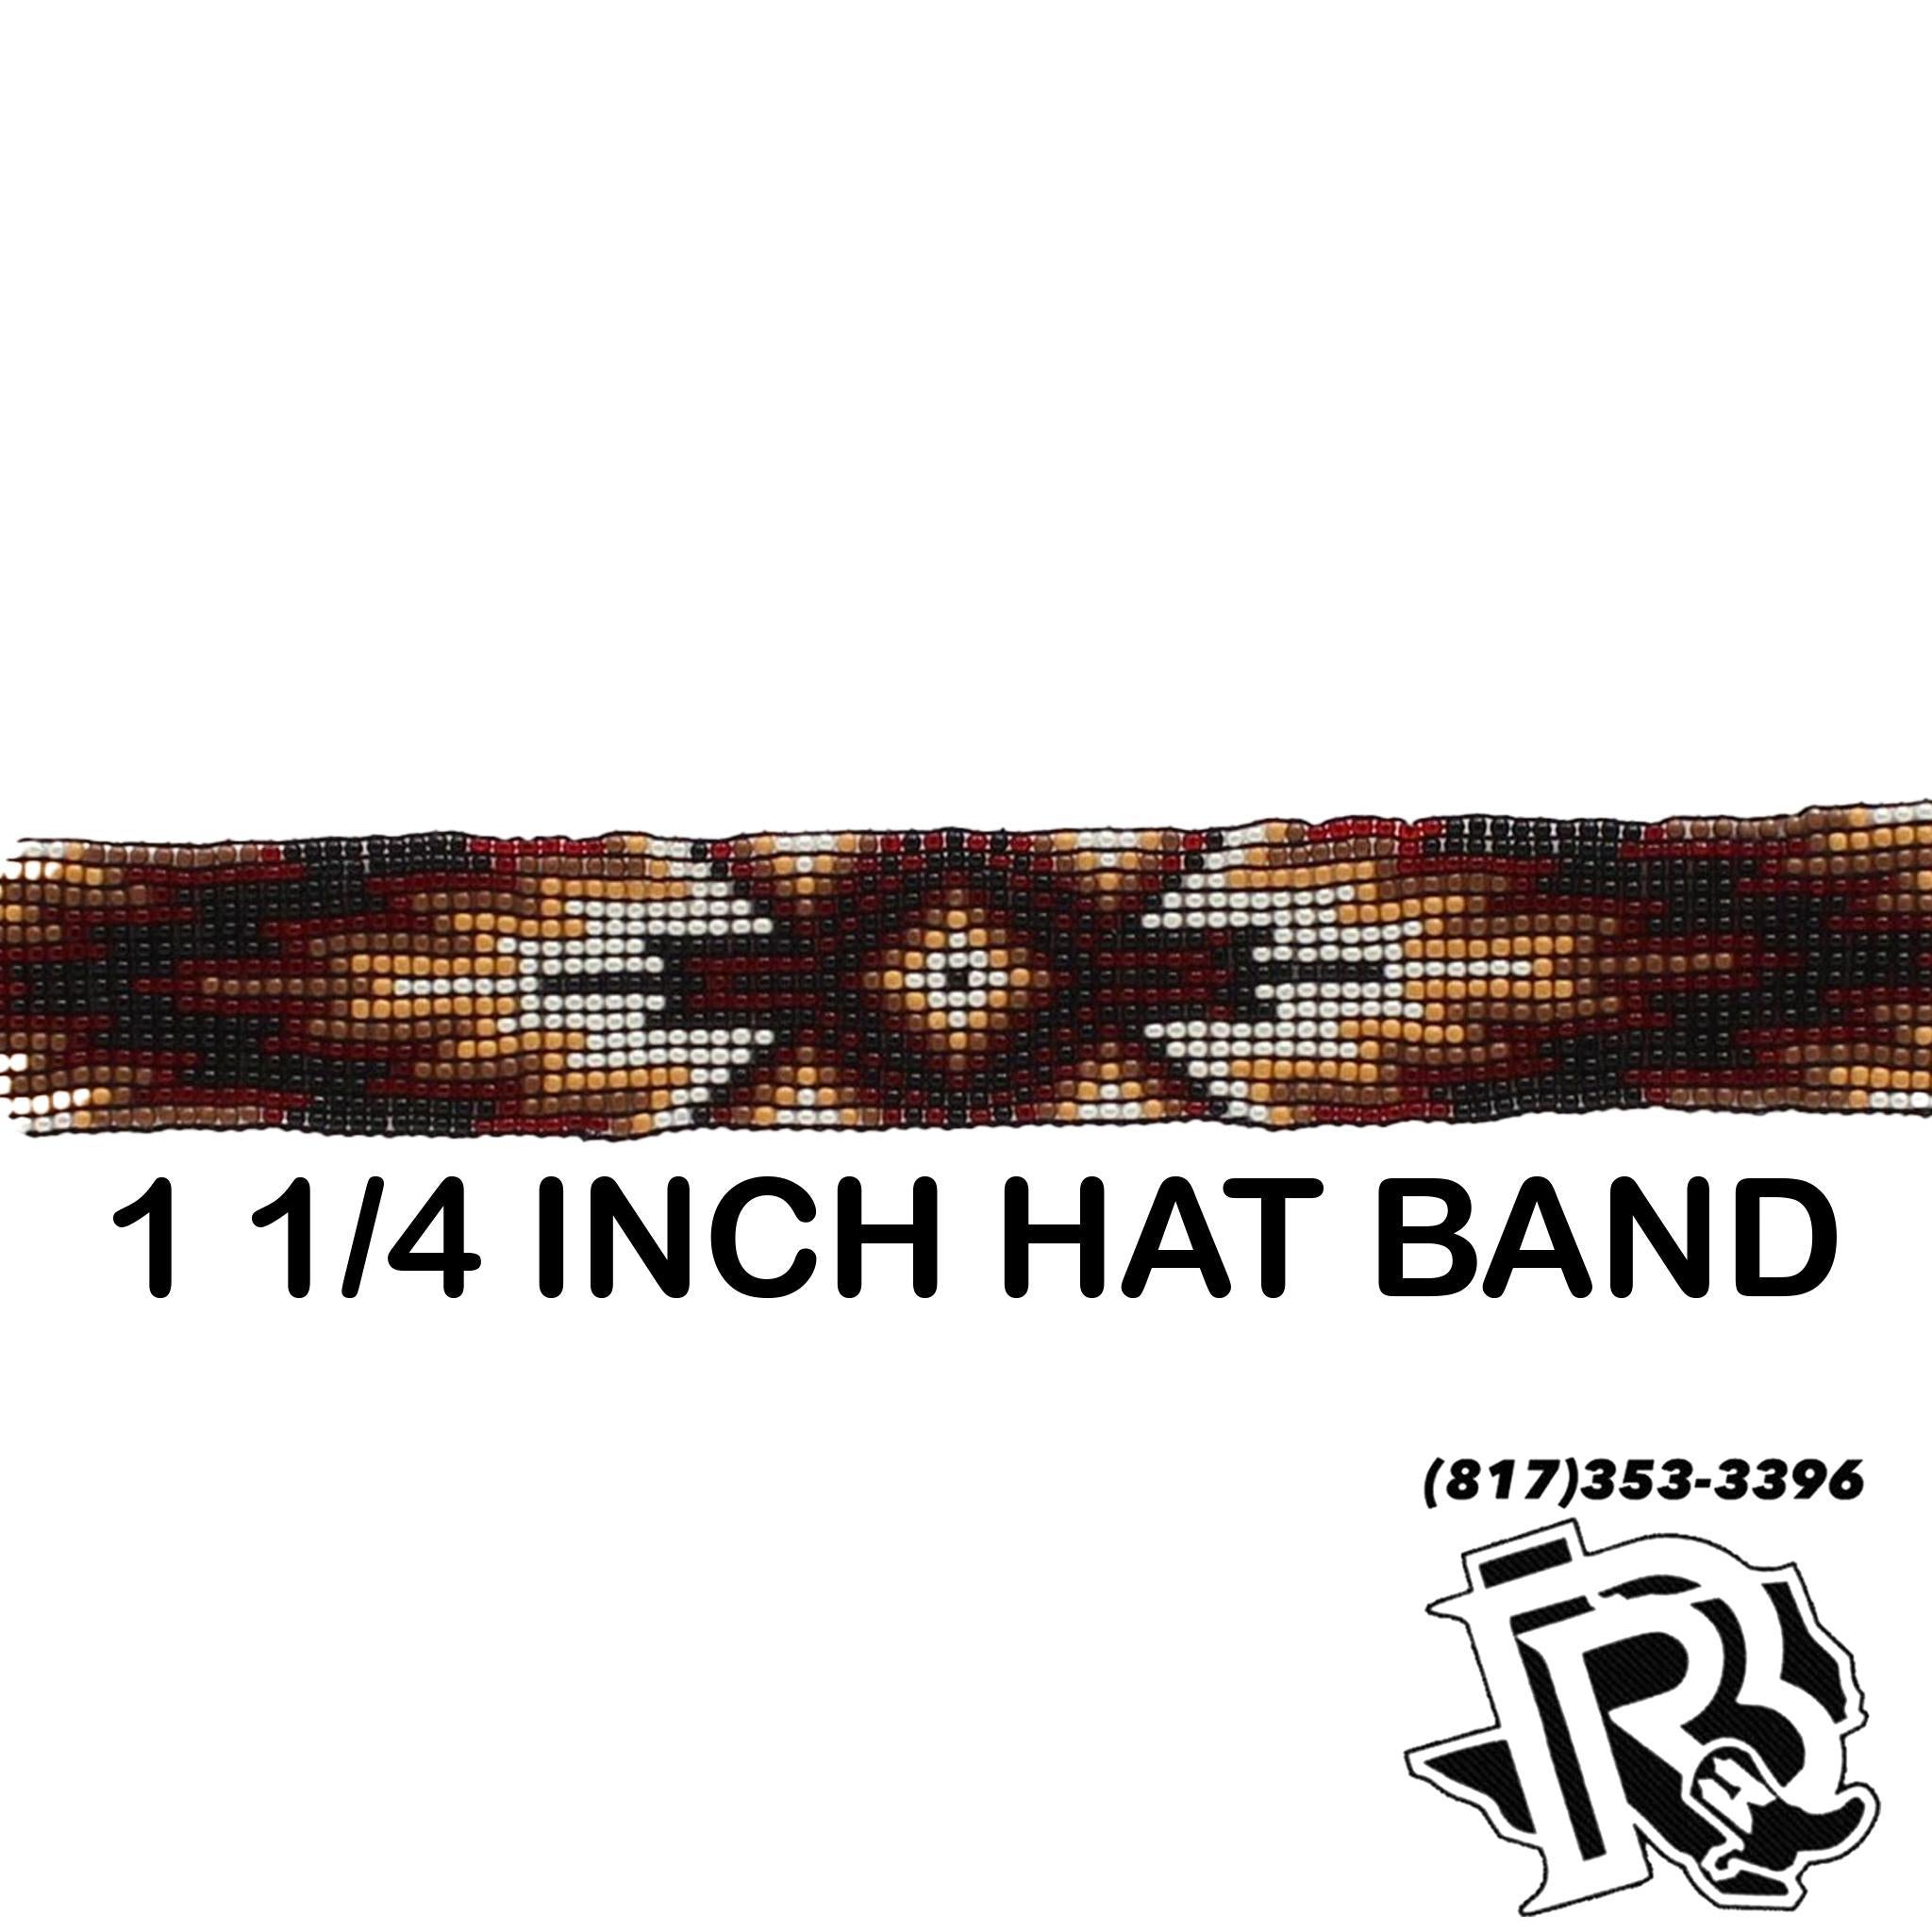 HATBANDS BEADED STRETCH BROWN